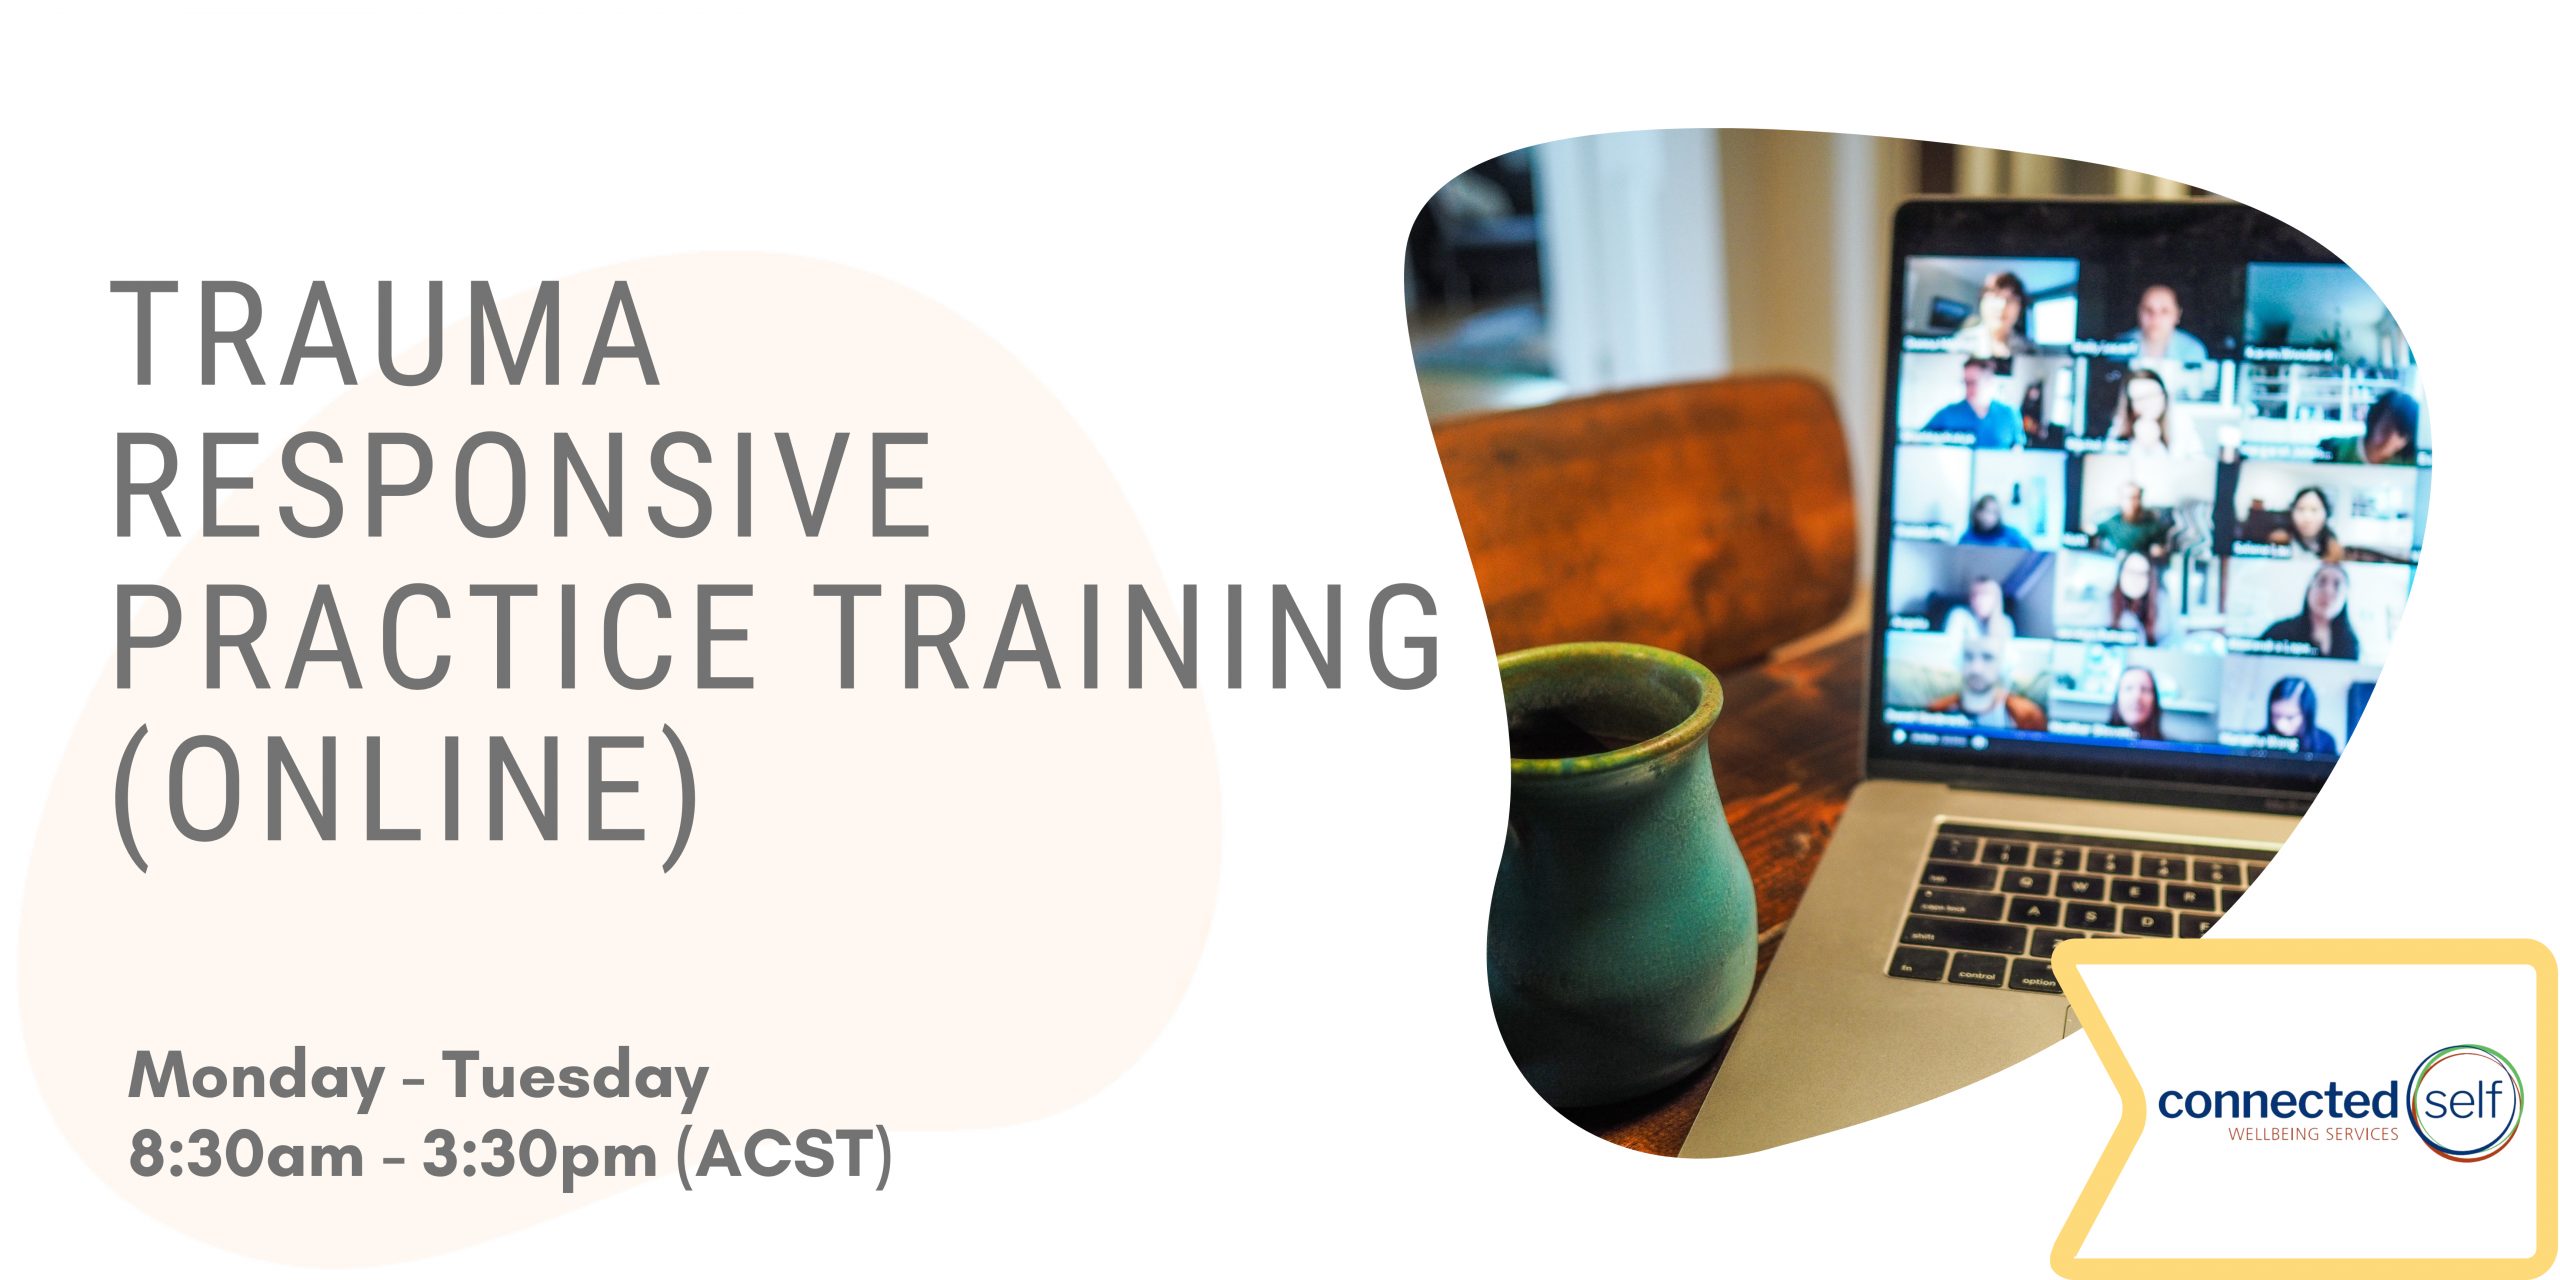 Trauma Responsive Practice Training (Online) facilitated by Connected Self